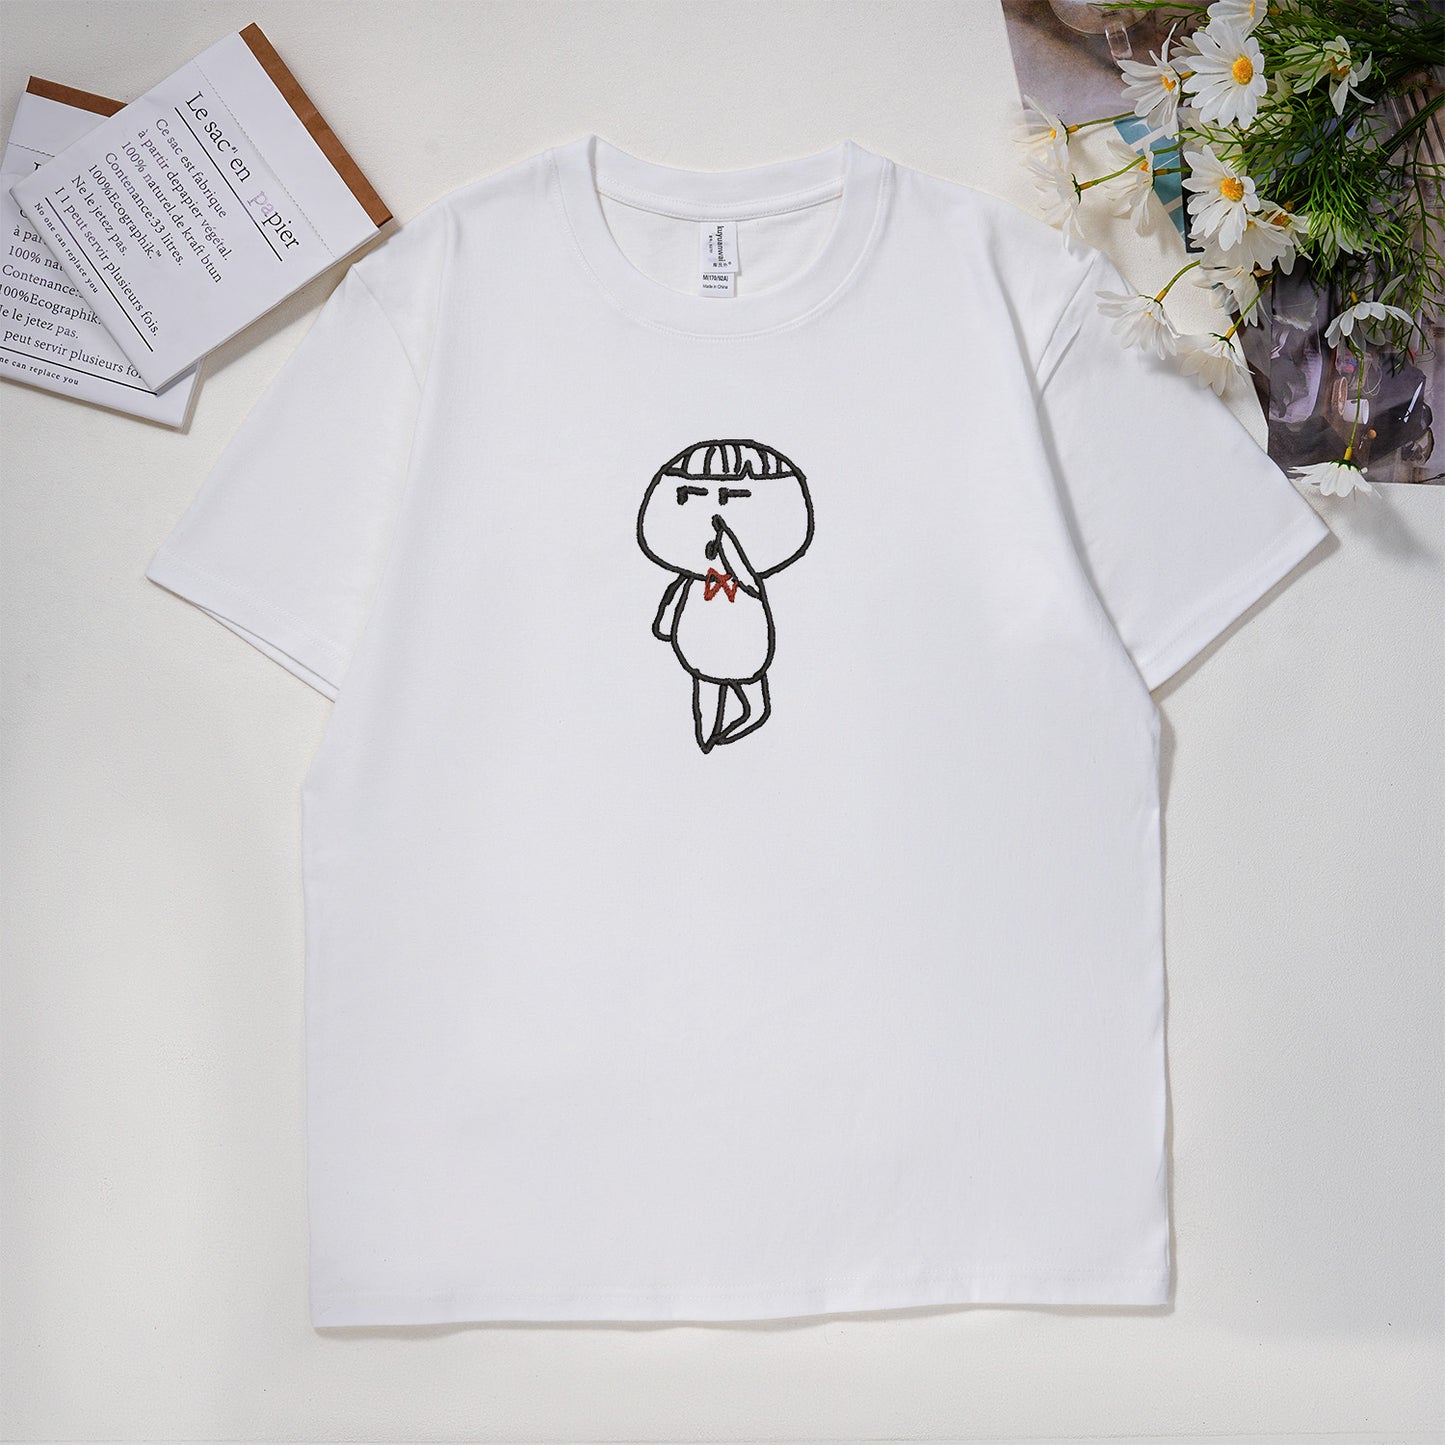 Personalized Kids Painting Embroidered Sweatshirt, Hand-painted Embroidered T-shirt, Special Gift for Parents